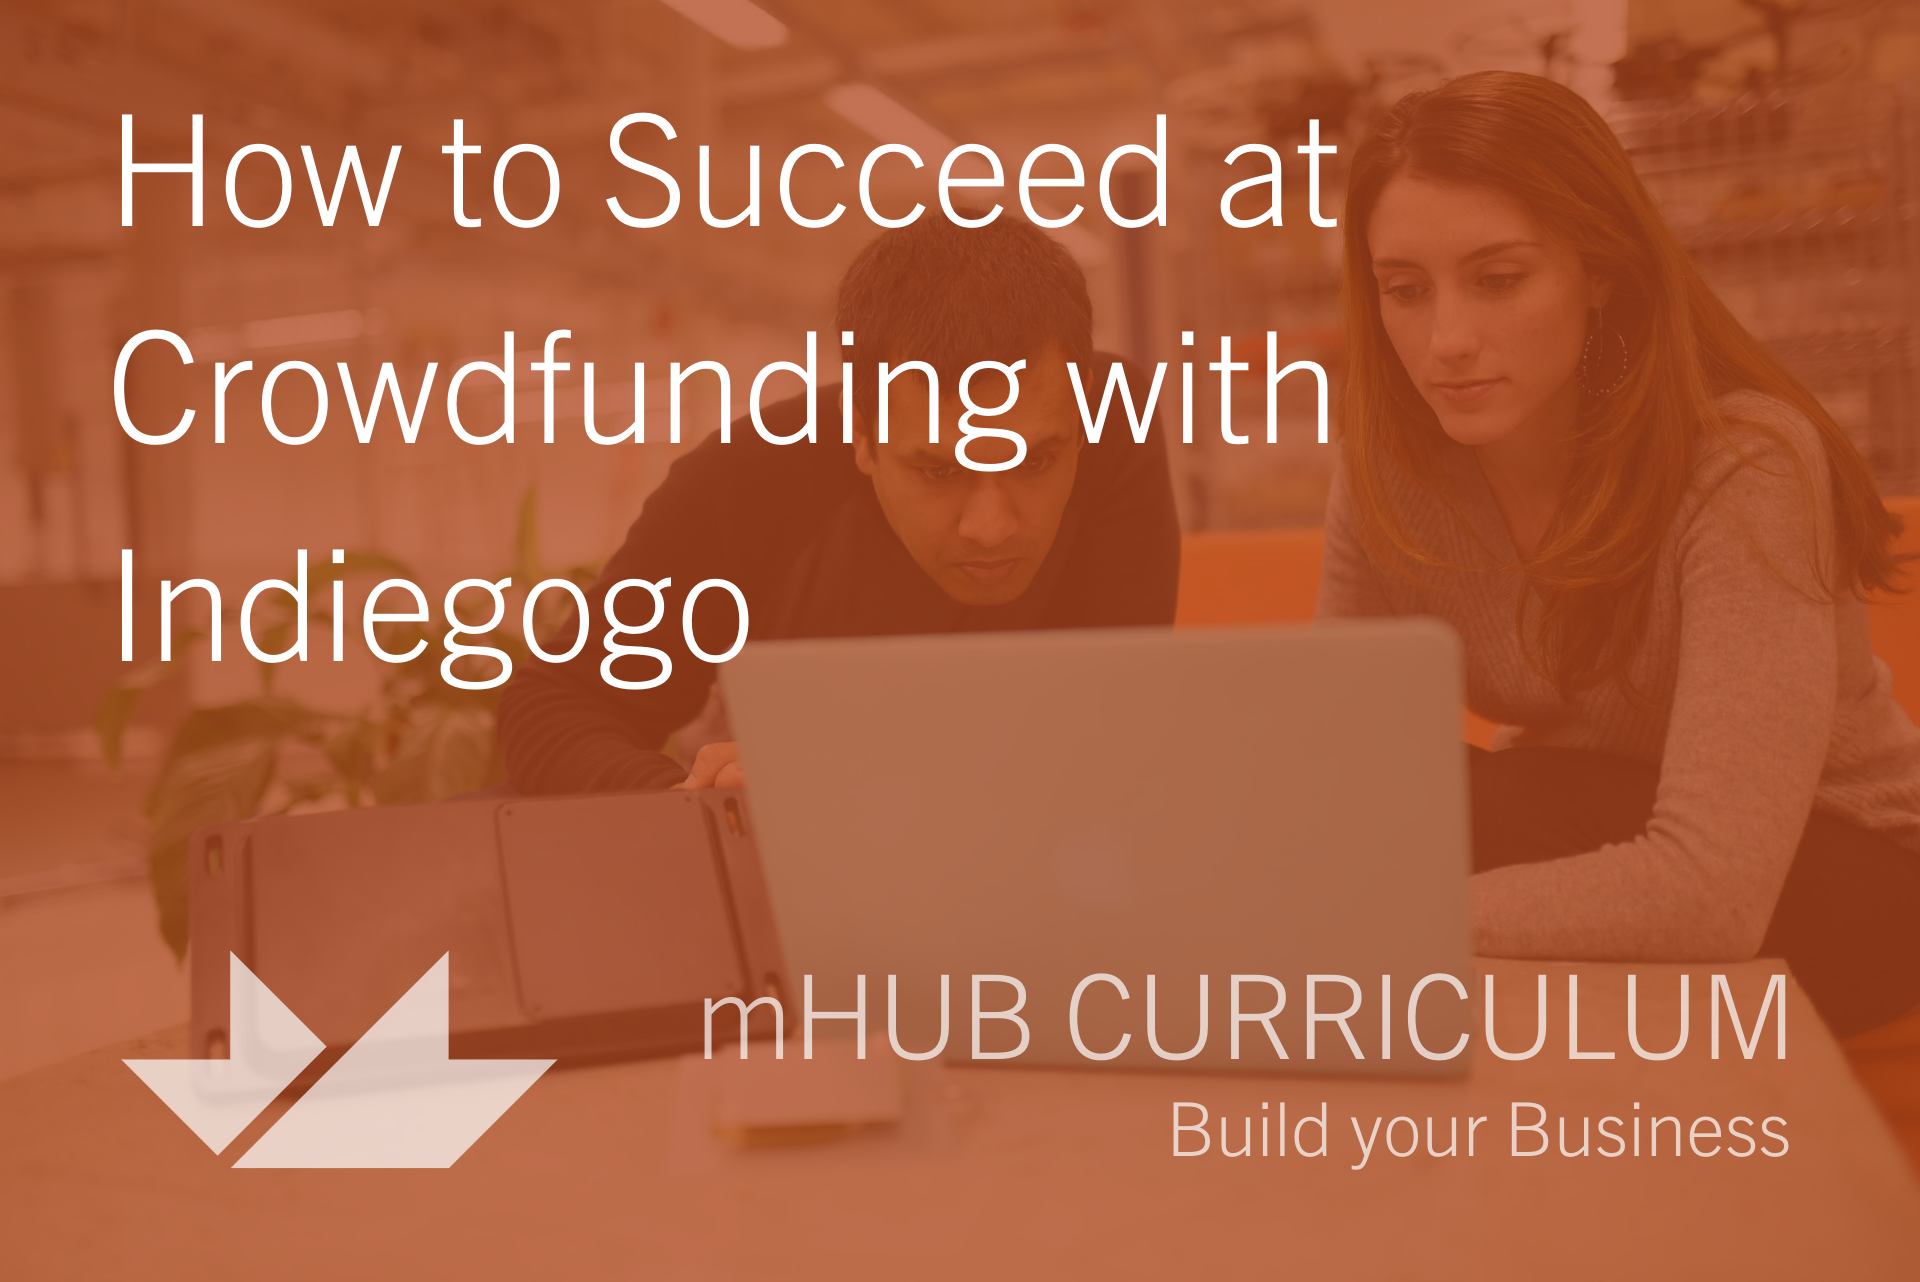 How to Succeed at Crowdfunding with Indiegogo